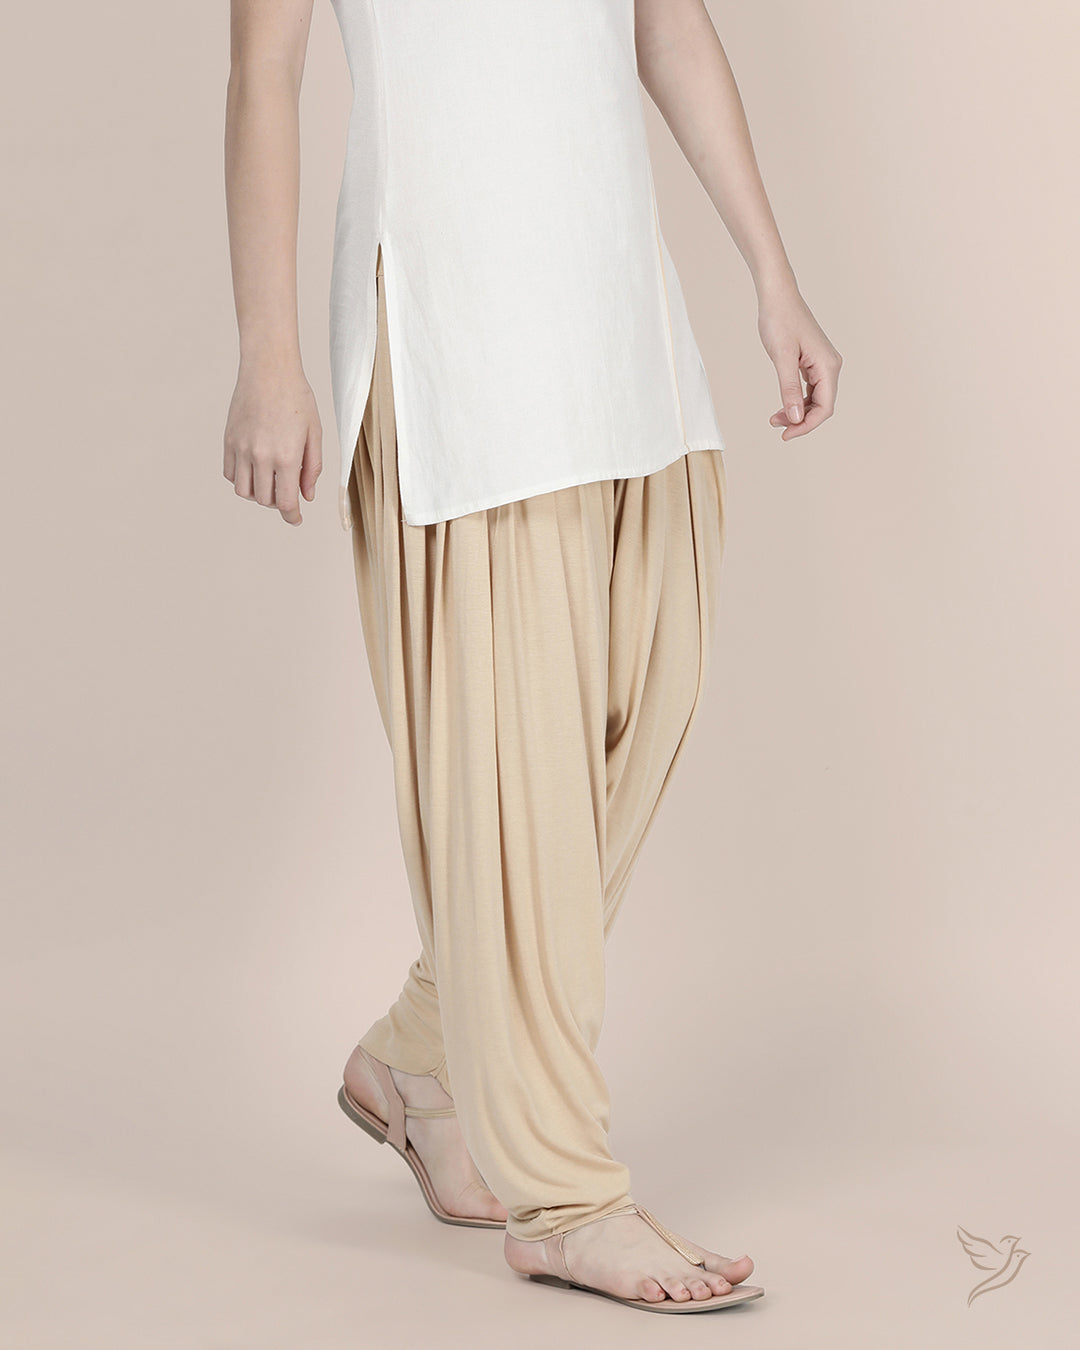 Sugar Cookie Patiala Pant for College Girls